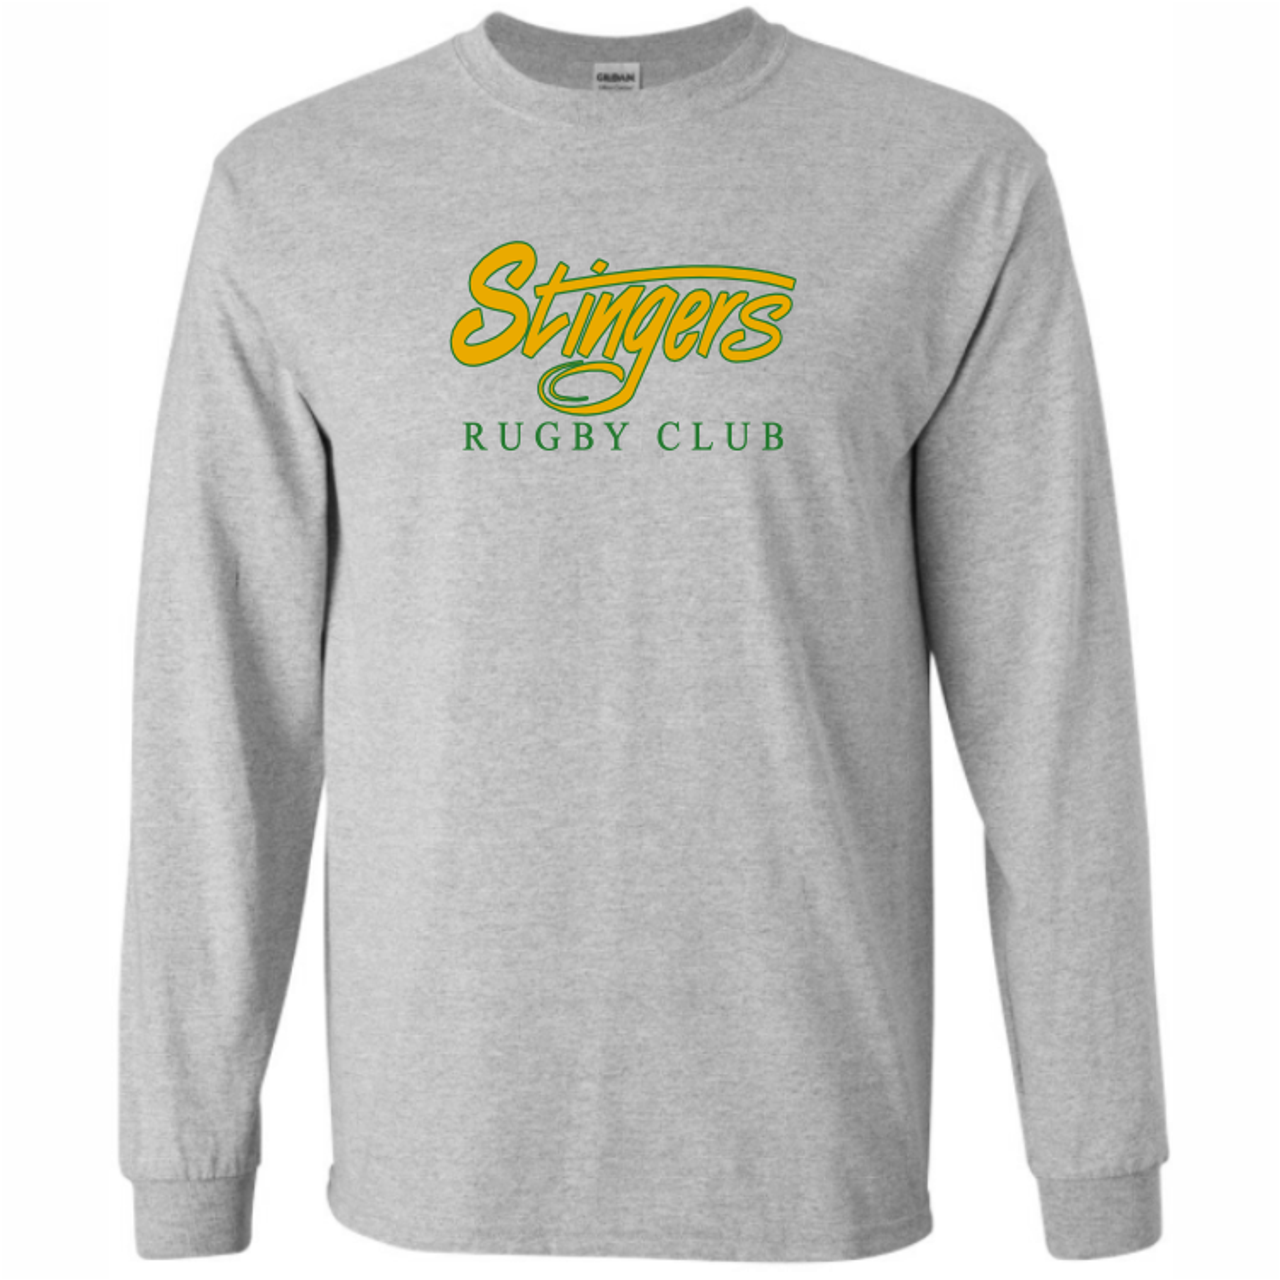 Stingers Rugby Club Cotton T-Shirt, Gray